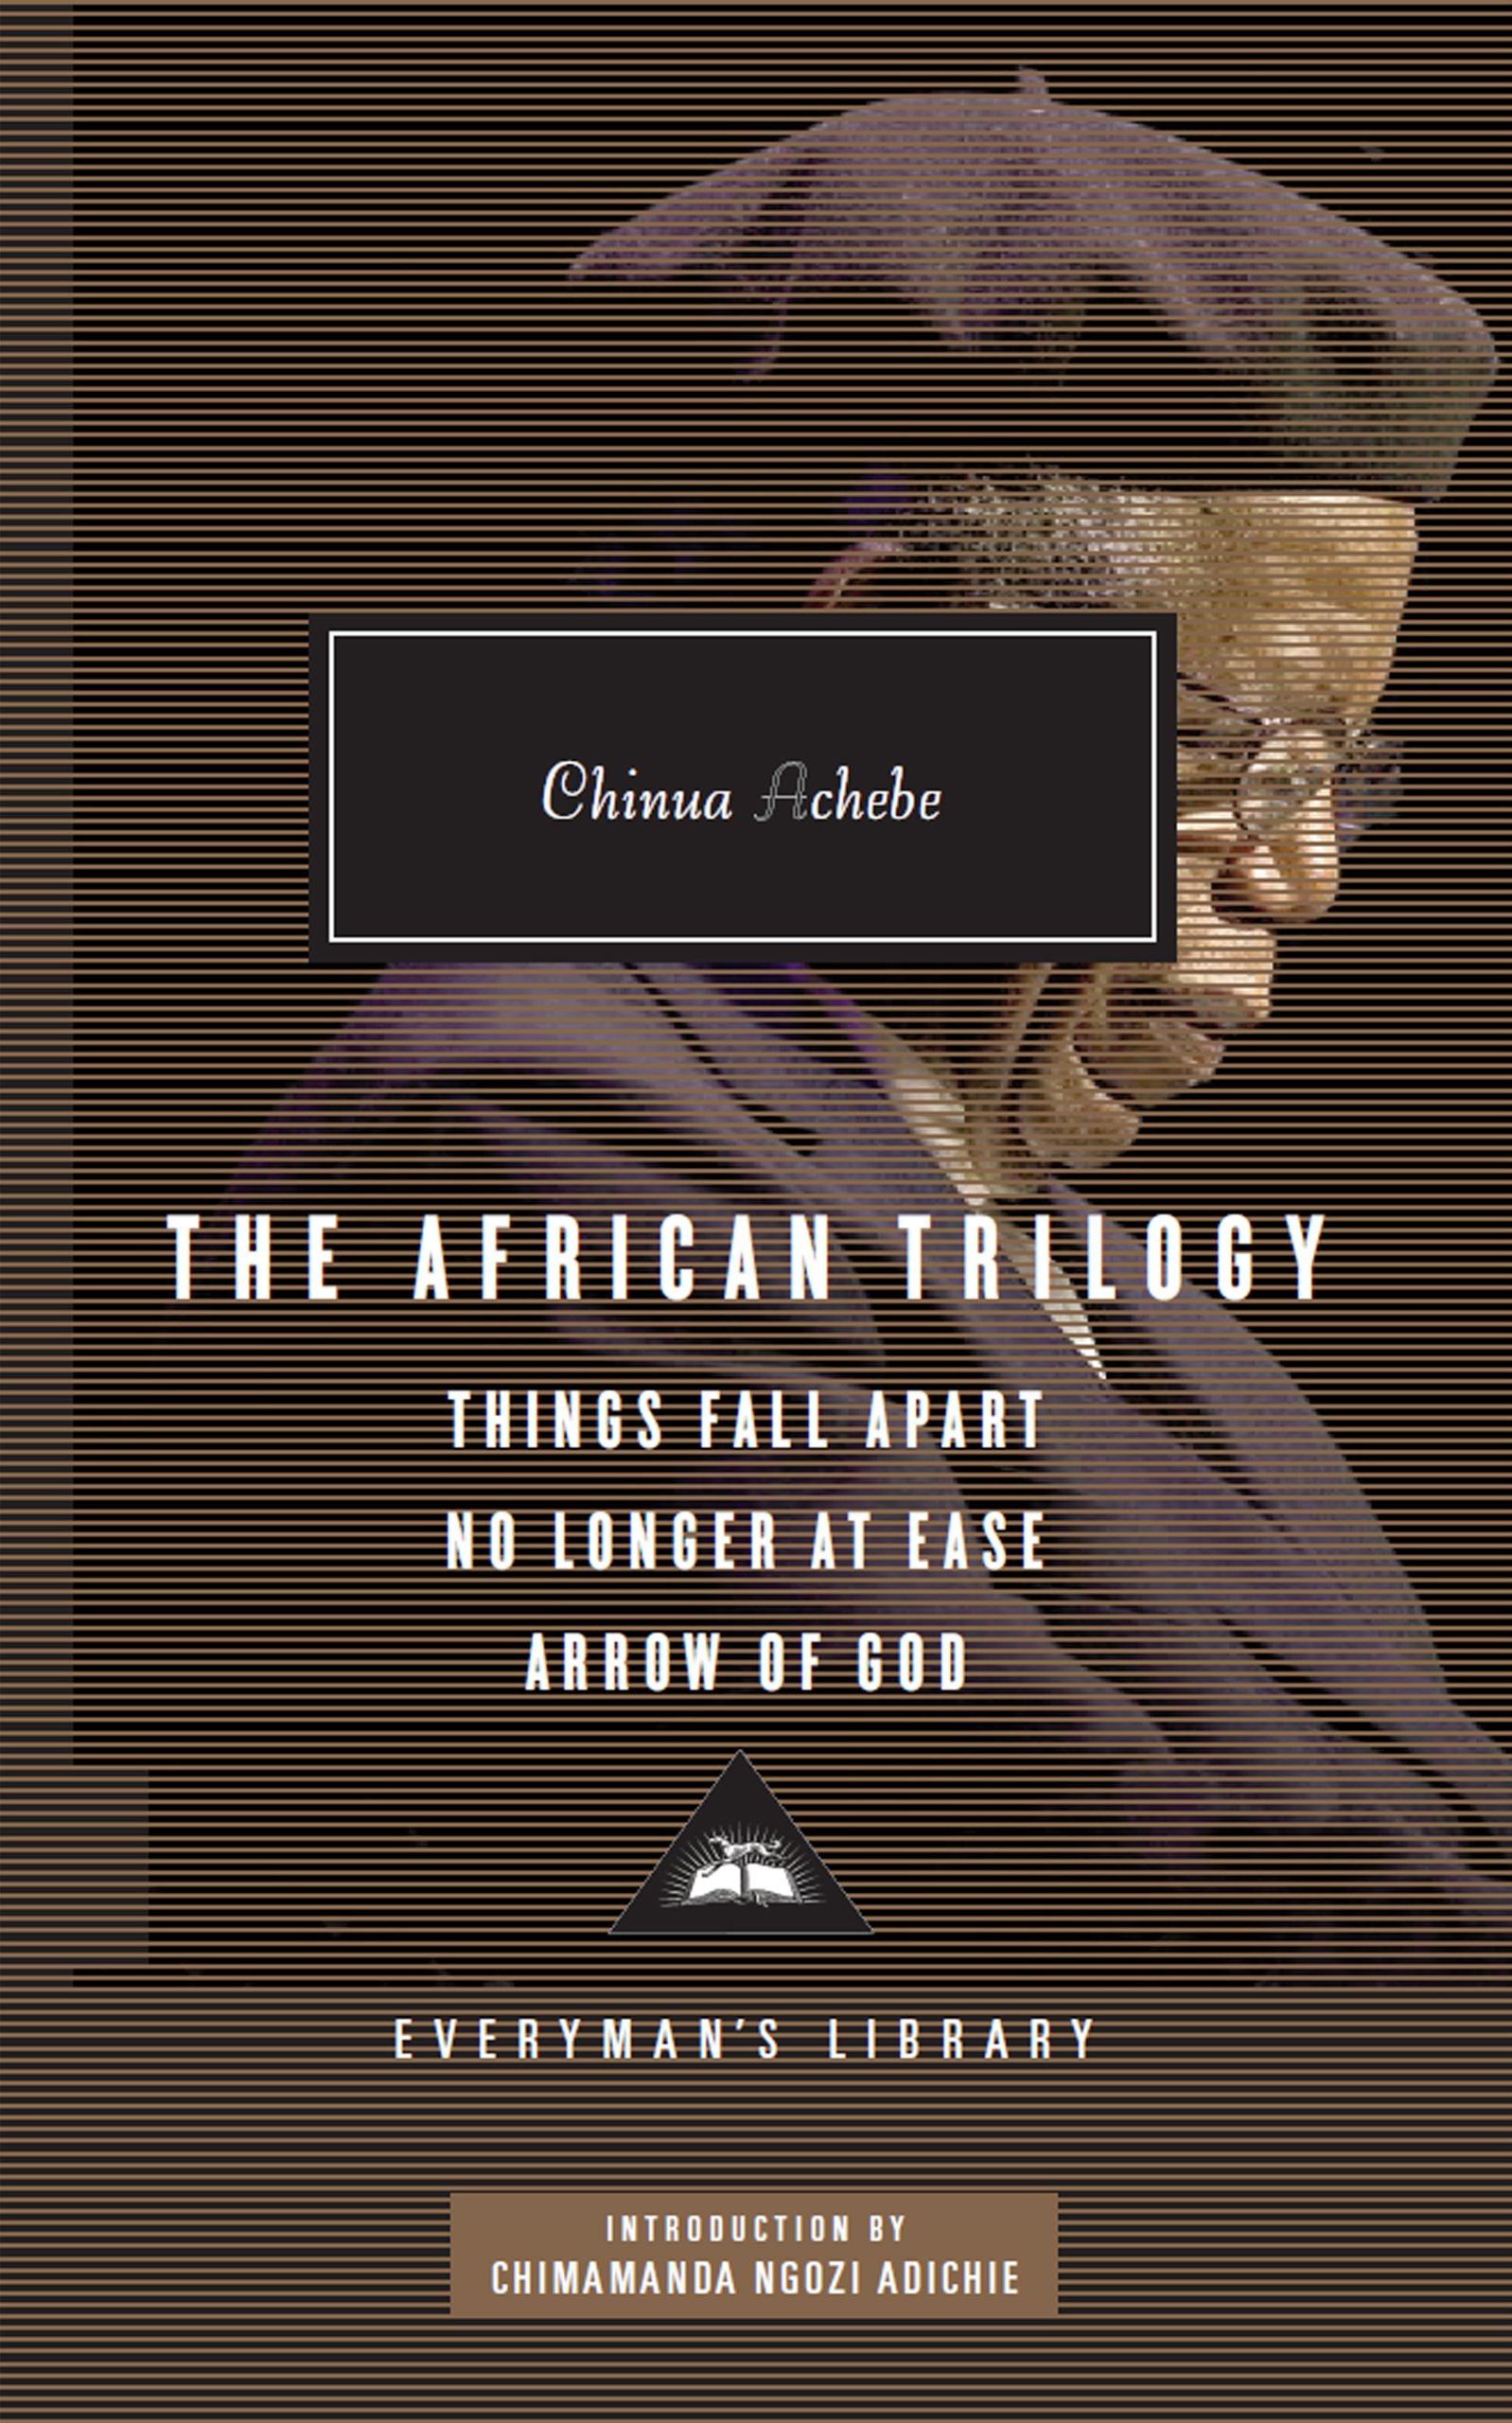 The African Trilogy: Things Fall Apart / No Longer at Ease / Arrow of God by Chinua Achebe